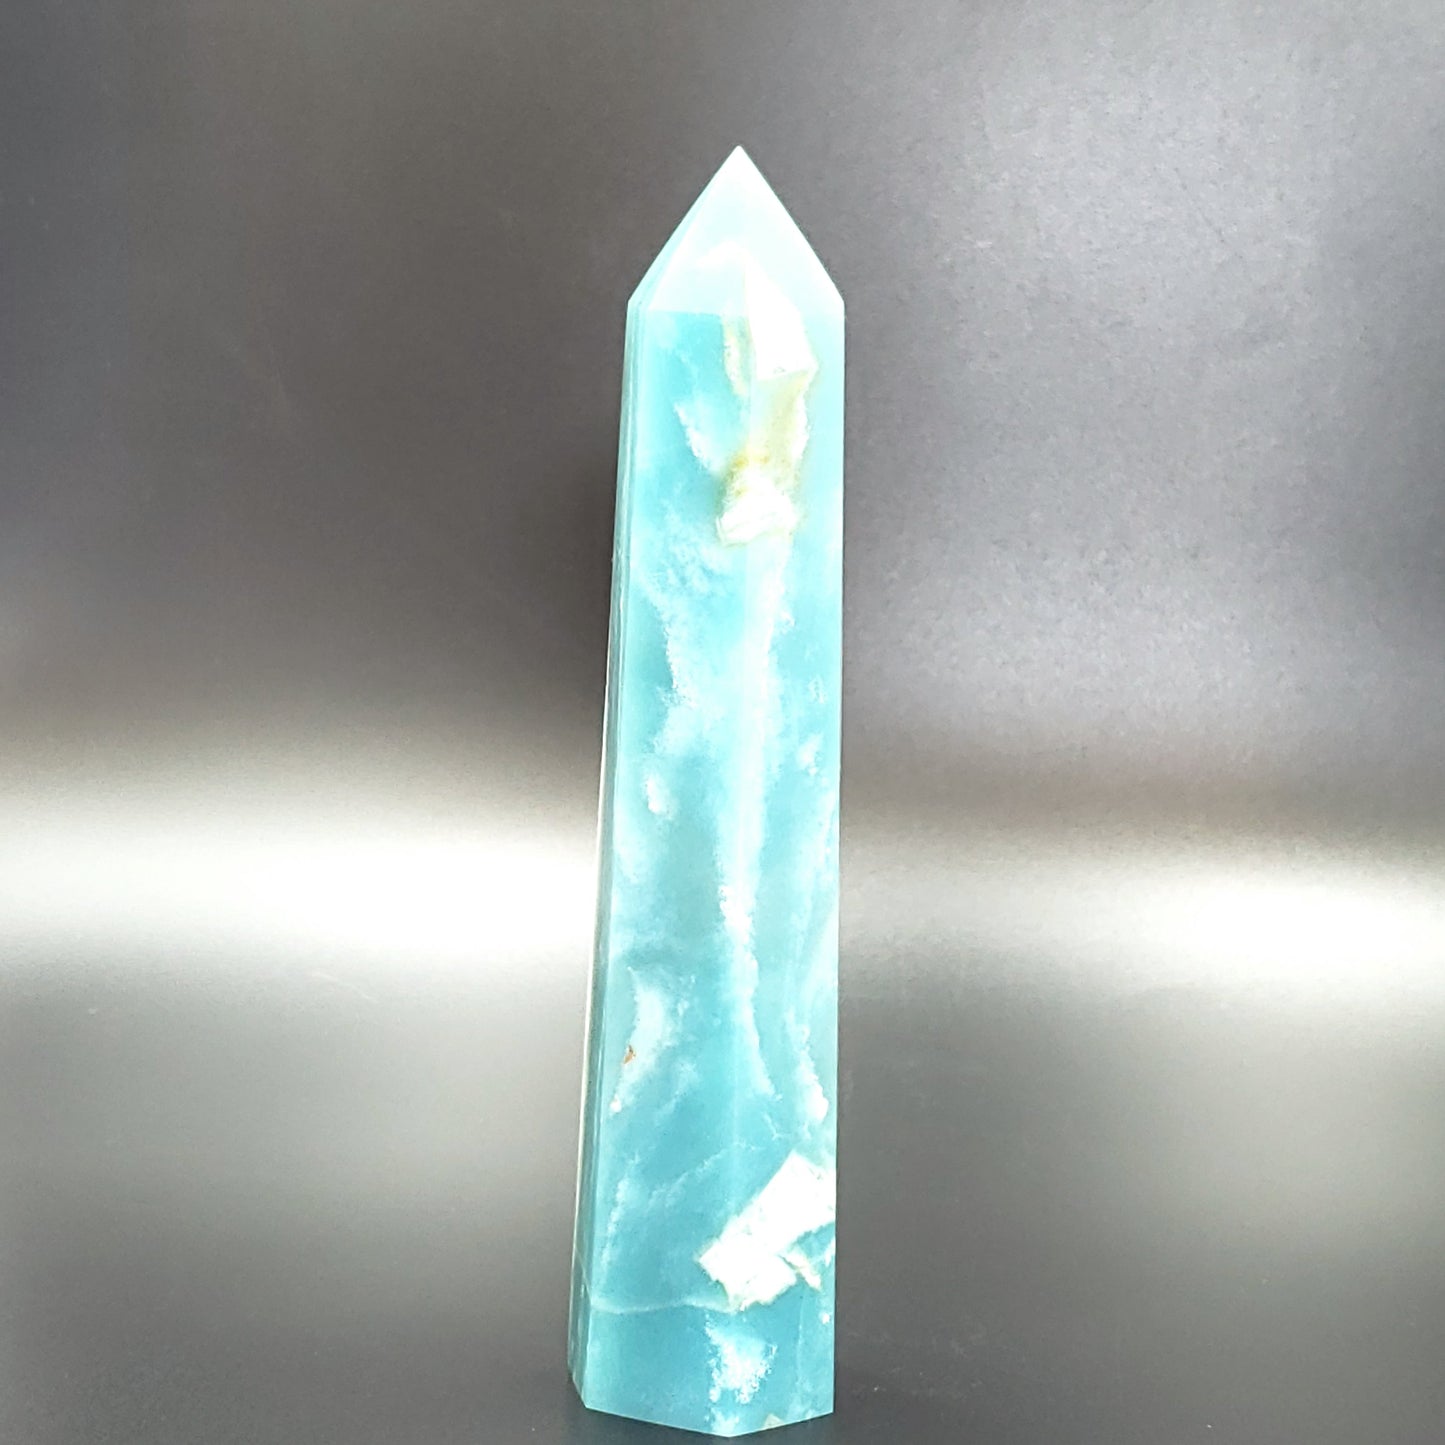 Caribbean Calcite Tower Caribbean Calcite Point 160mm 6.3" - Crystal/Stone Decor